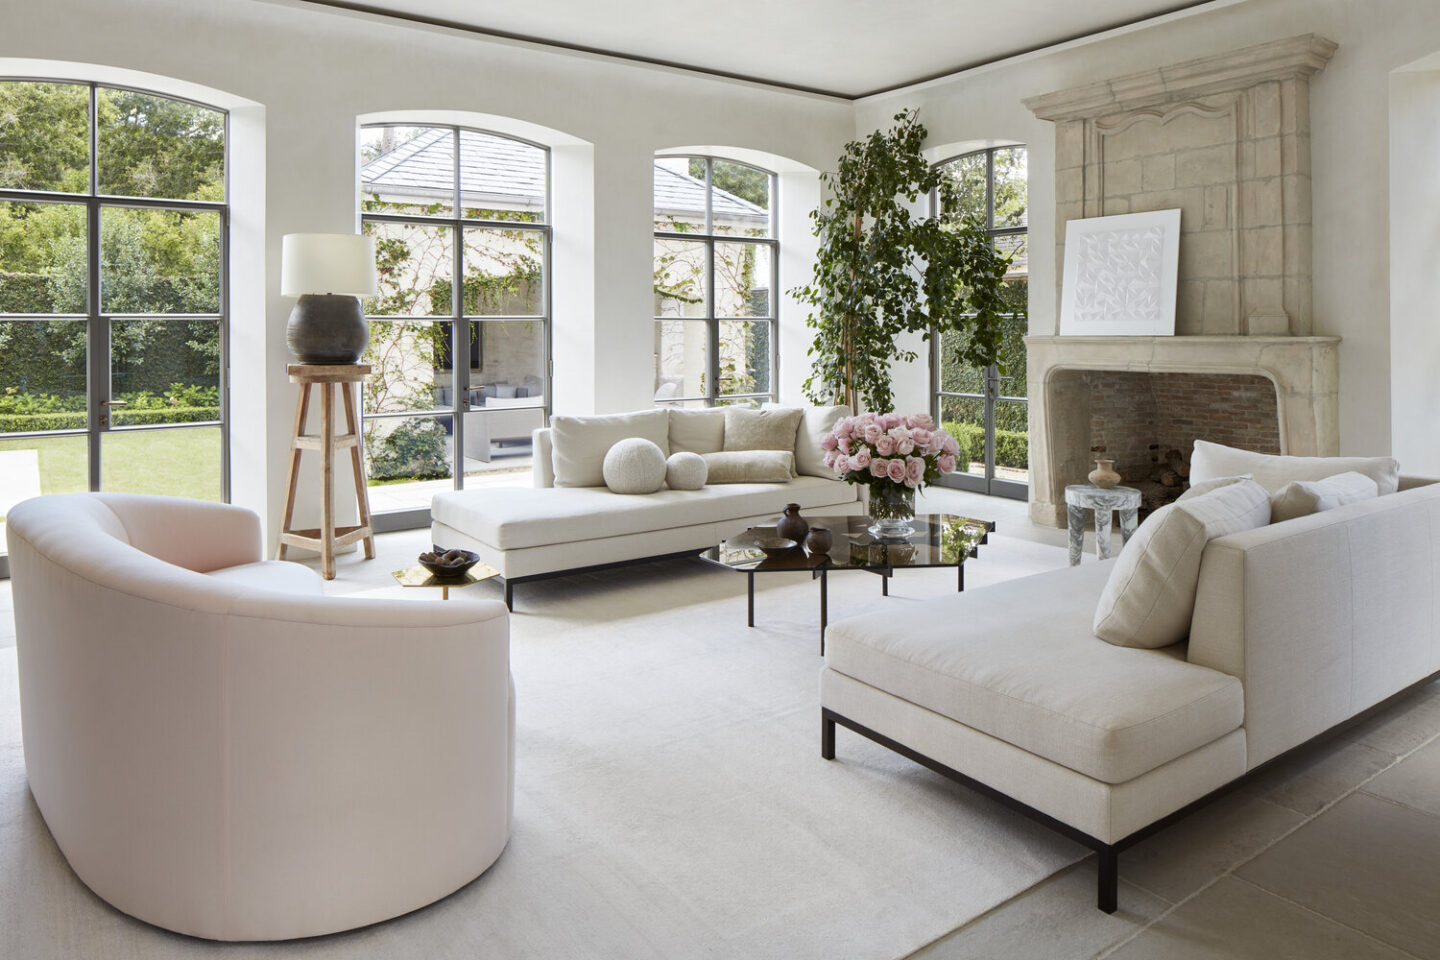 Modern French living room with elegant white mix of antiques - design by Jill Egan and architecture by Kirby Mears. #modernfrench #livingrooms